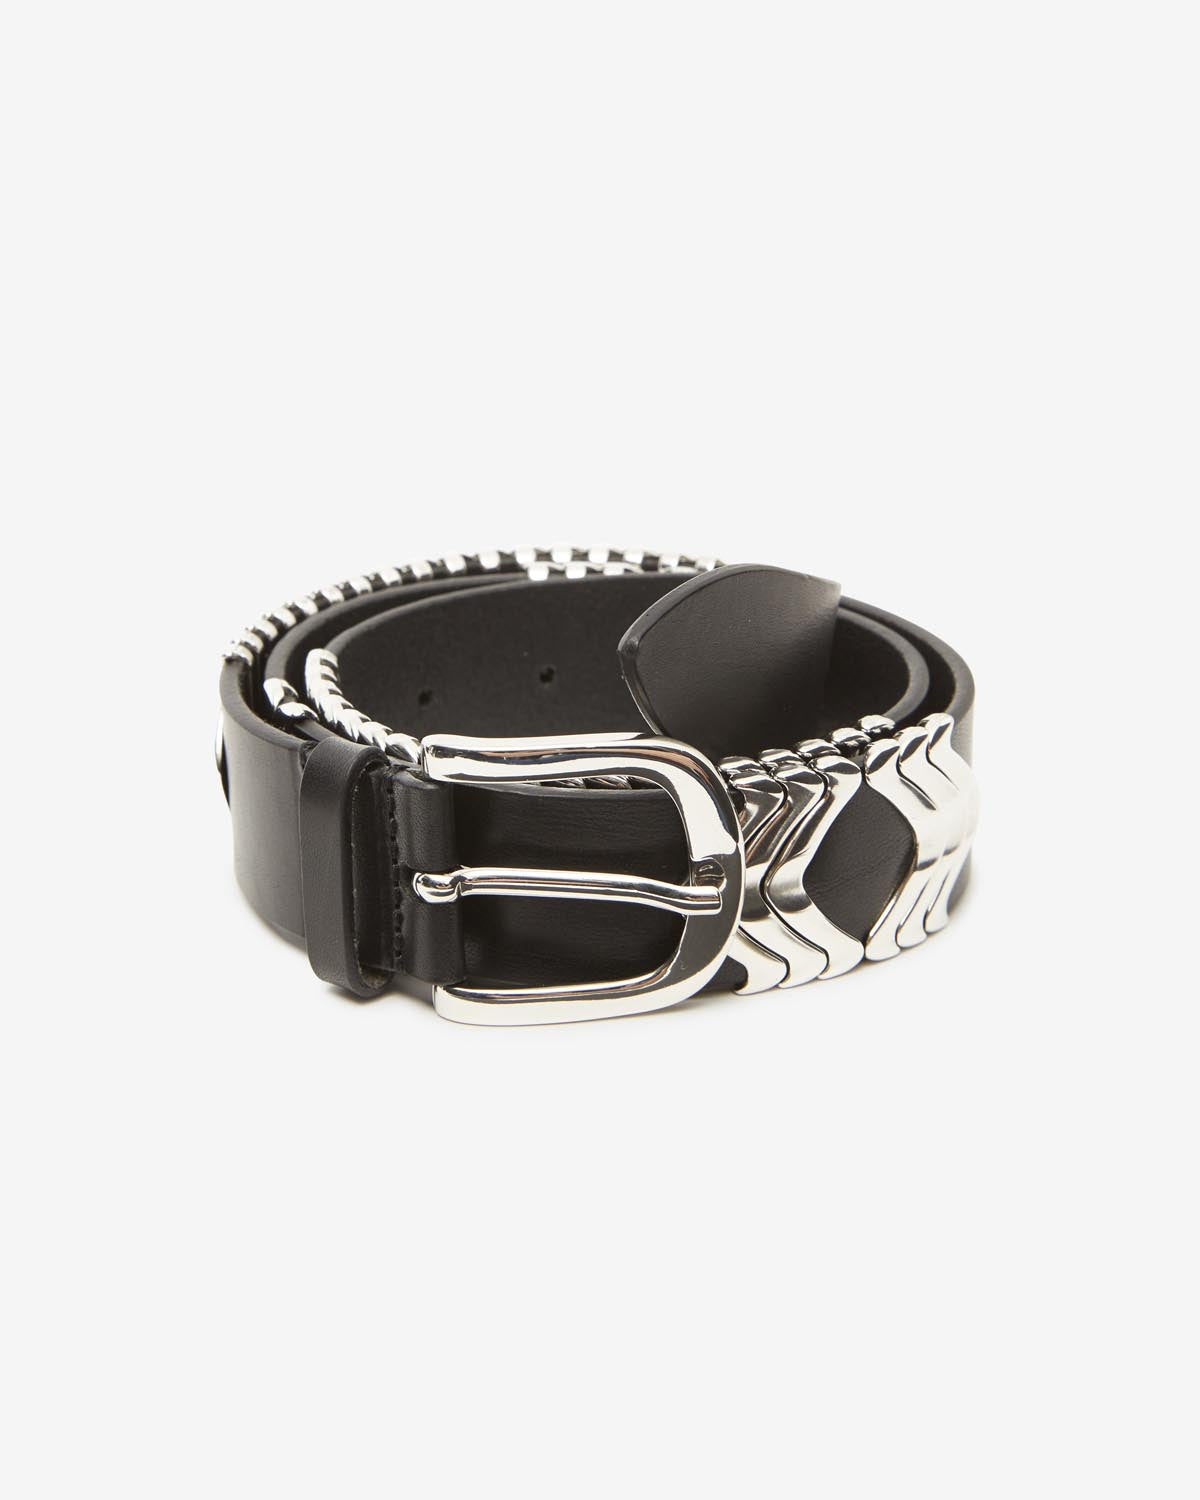 Tehora belt Woman Black and silver 9